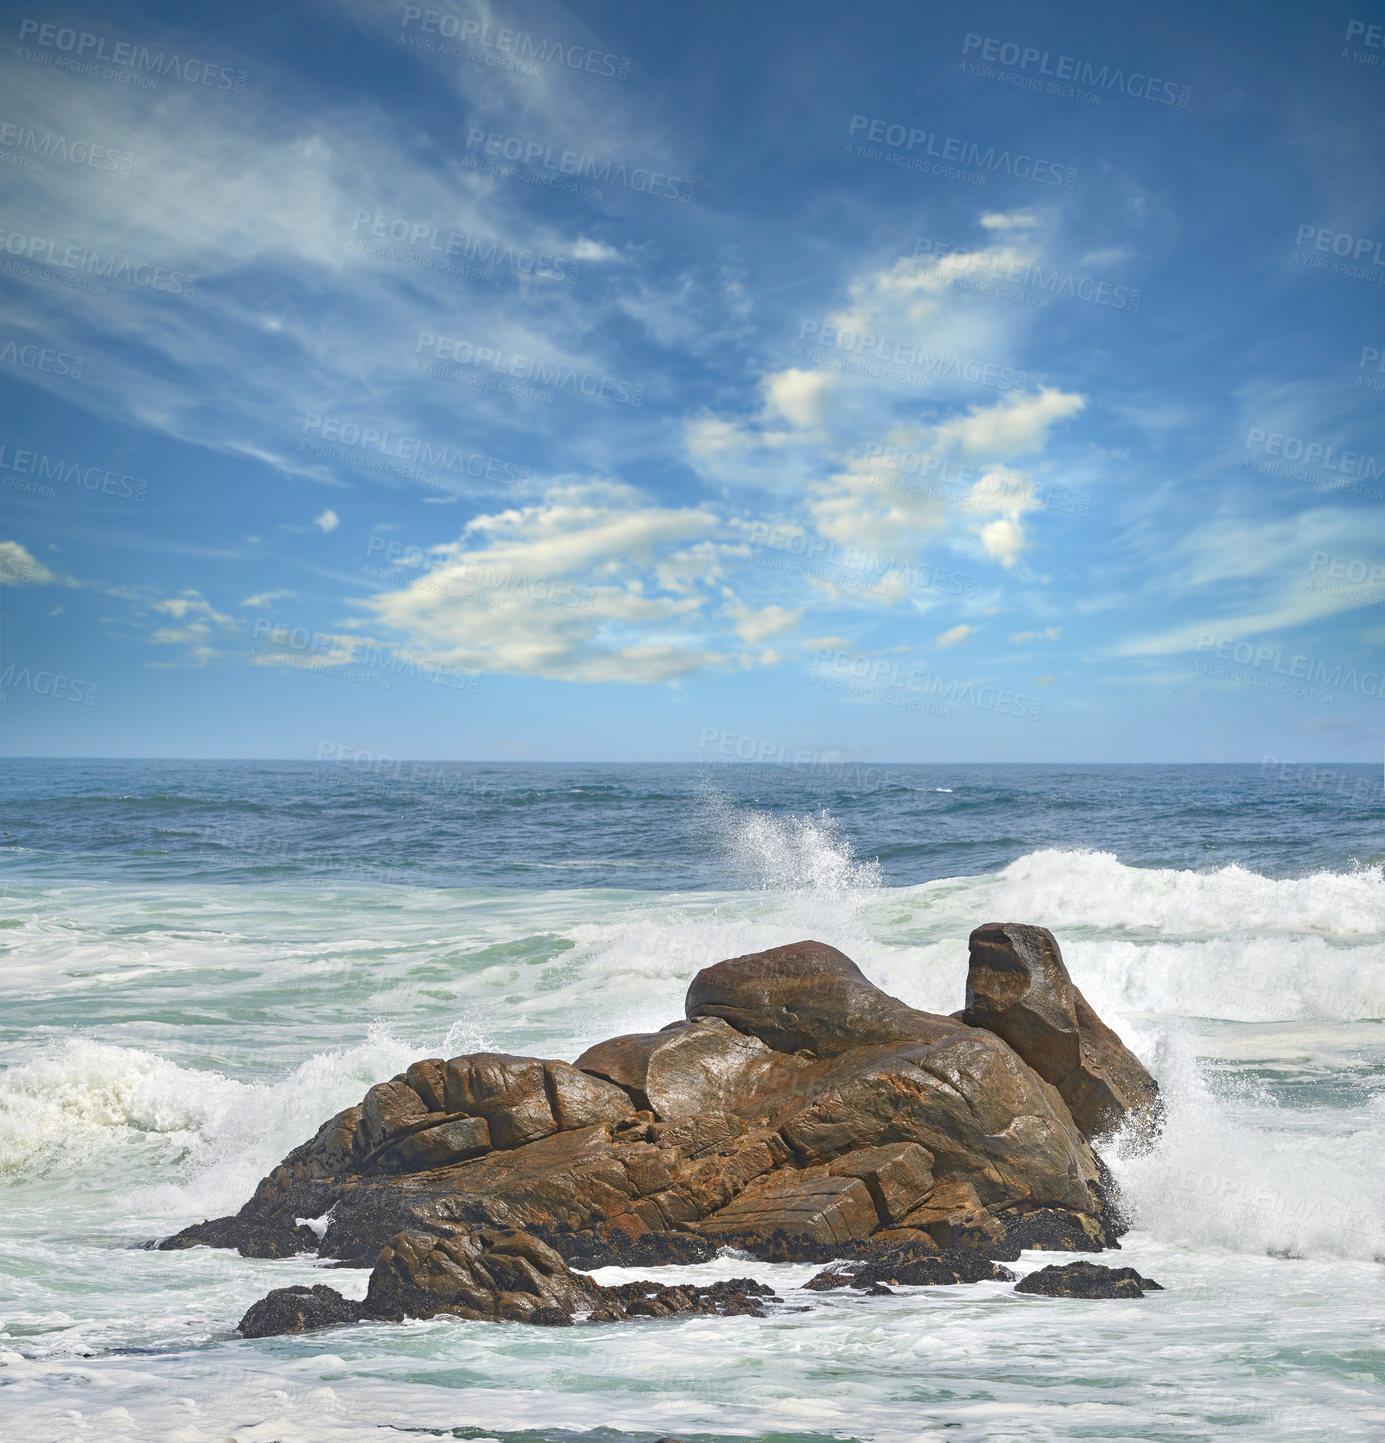 Buy stock photo Copy space of a turbulent sea with rough tides and choppy waves from strong winds crashing onto big boulders at the beach with a cloudy blue sky background. Rocky coast in Western Cape, South Africa